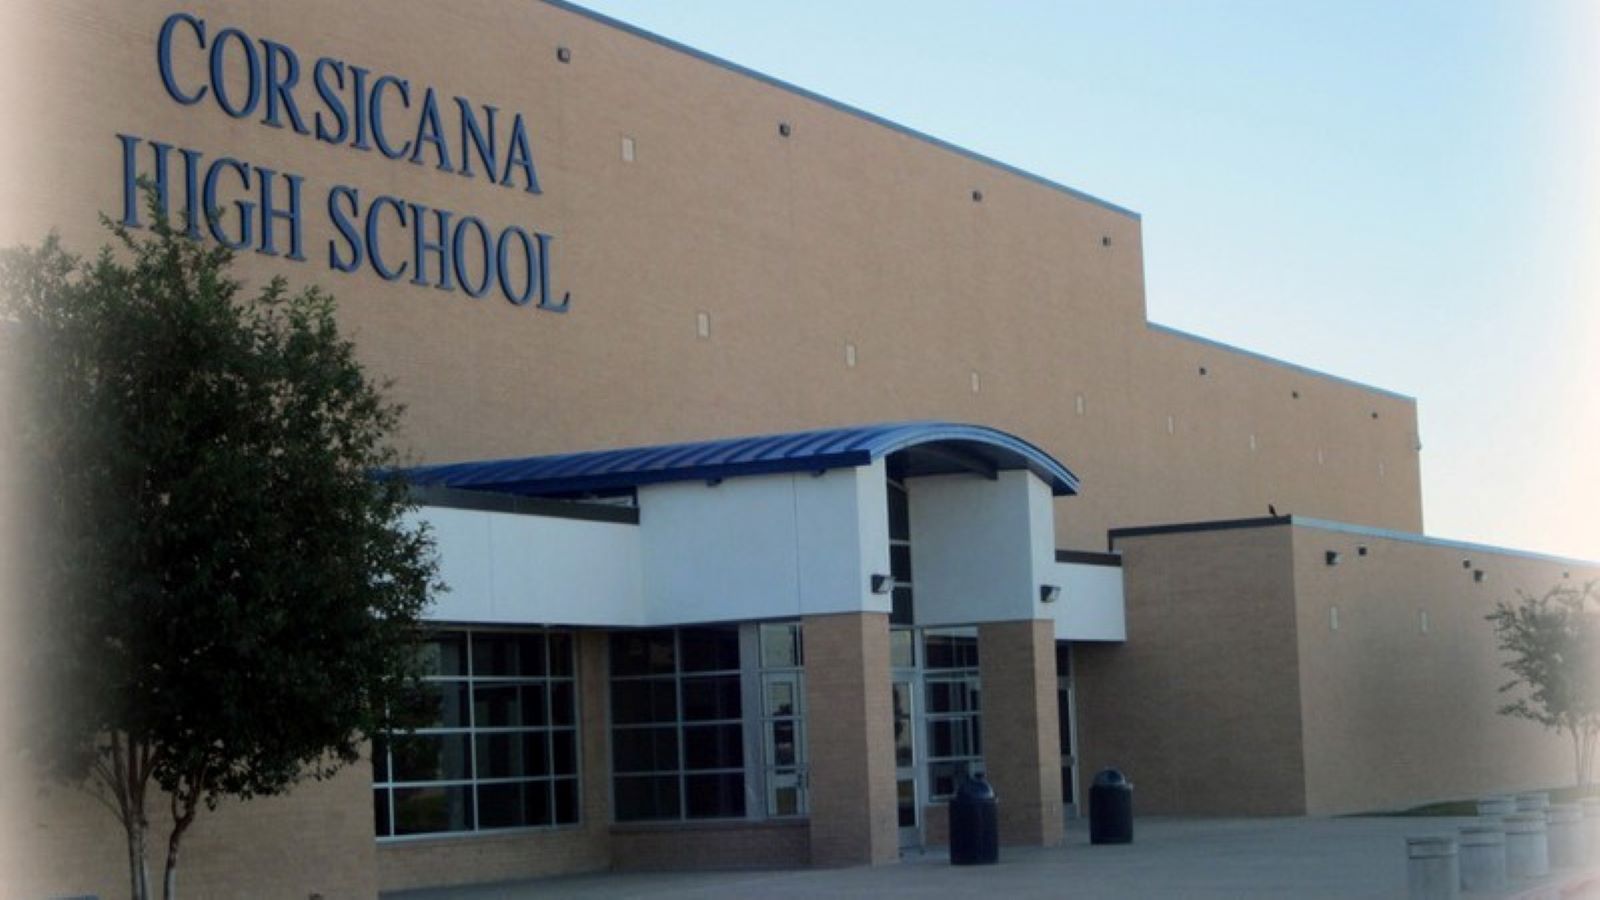 Four students arrested at Corsicana High School.